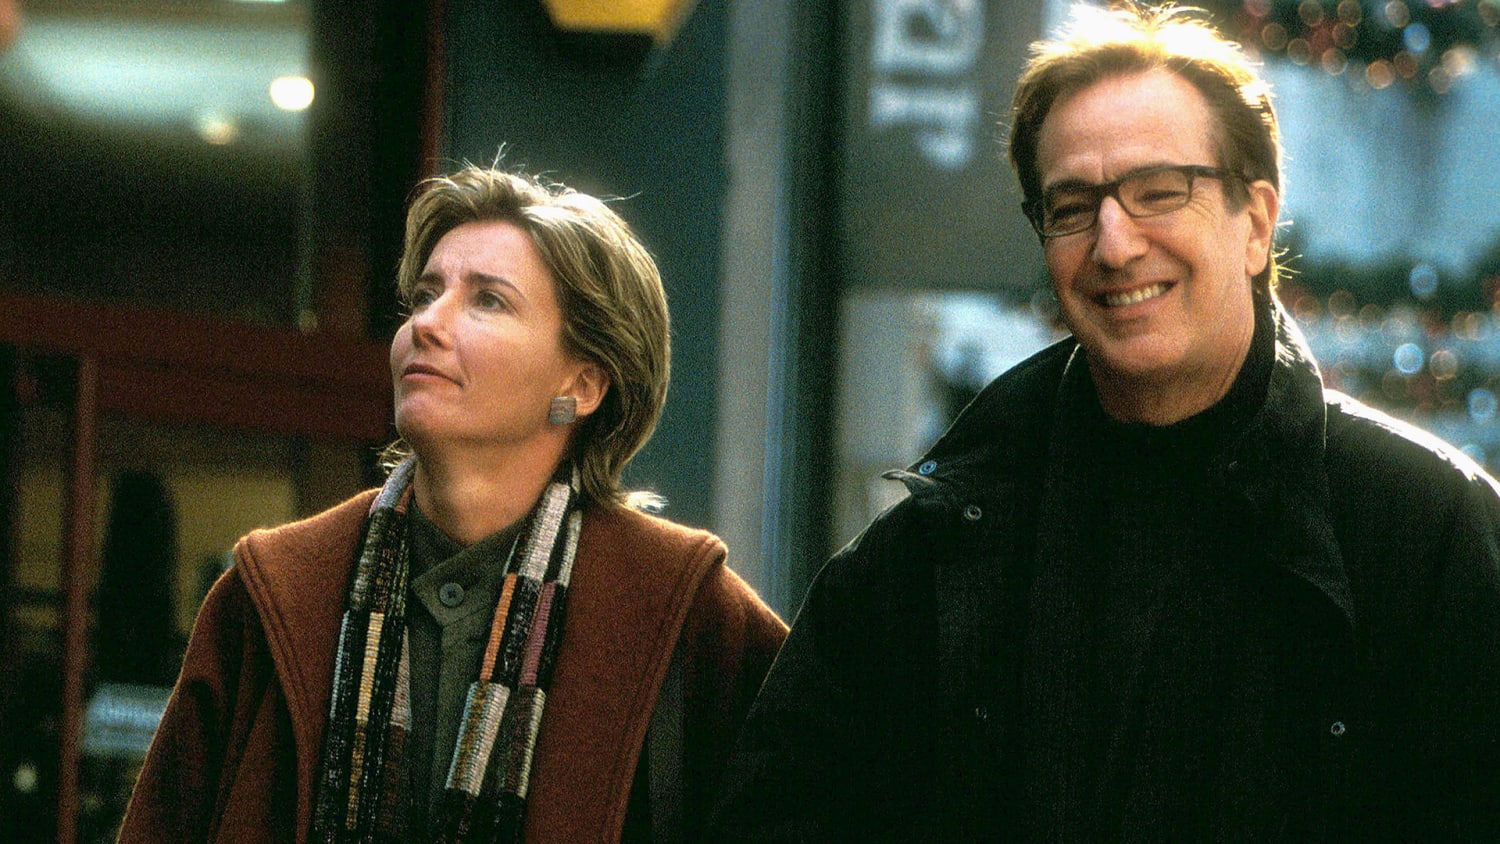 Emma Thompson won’t be in ‘Love Actually’ sequel for a very sad reason